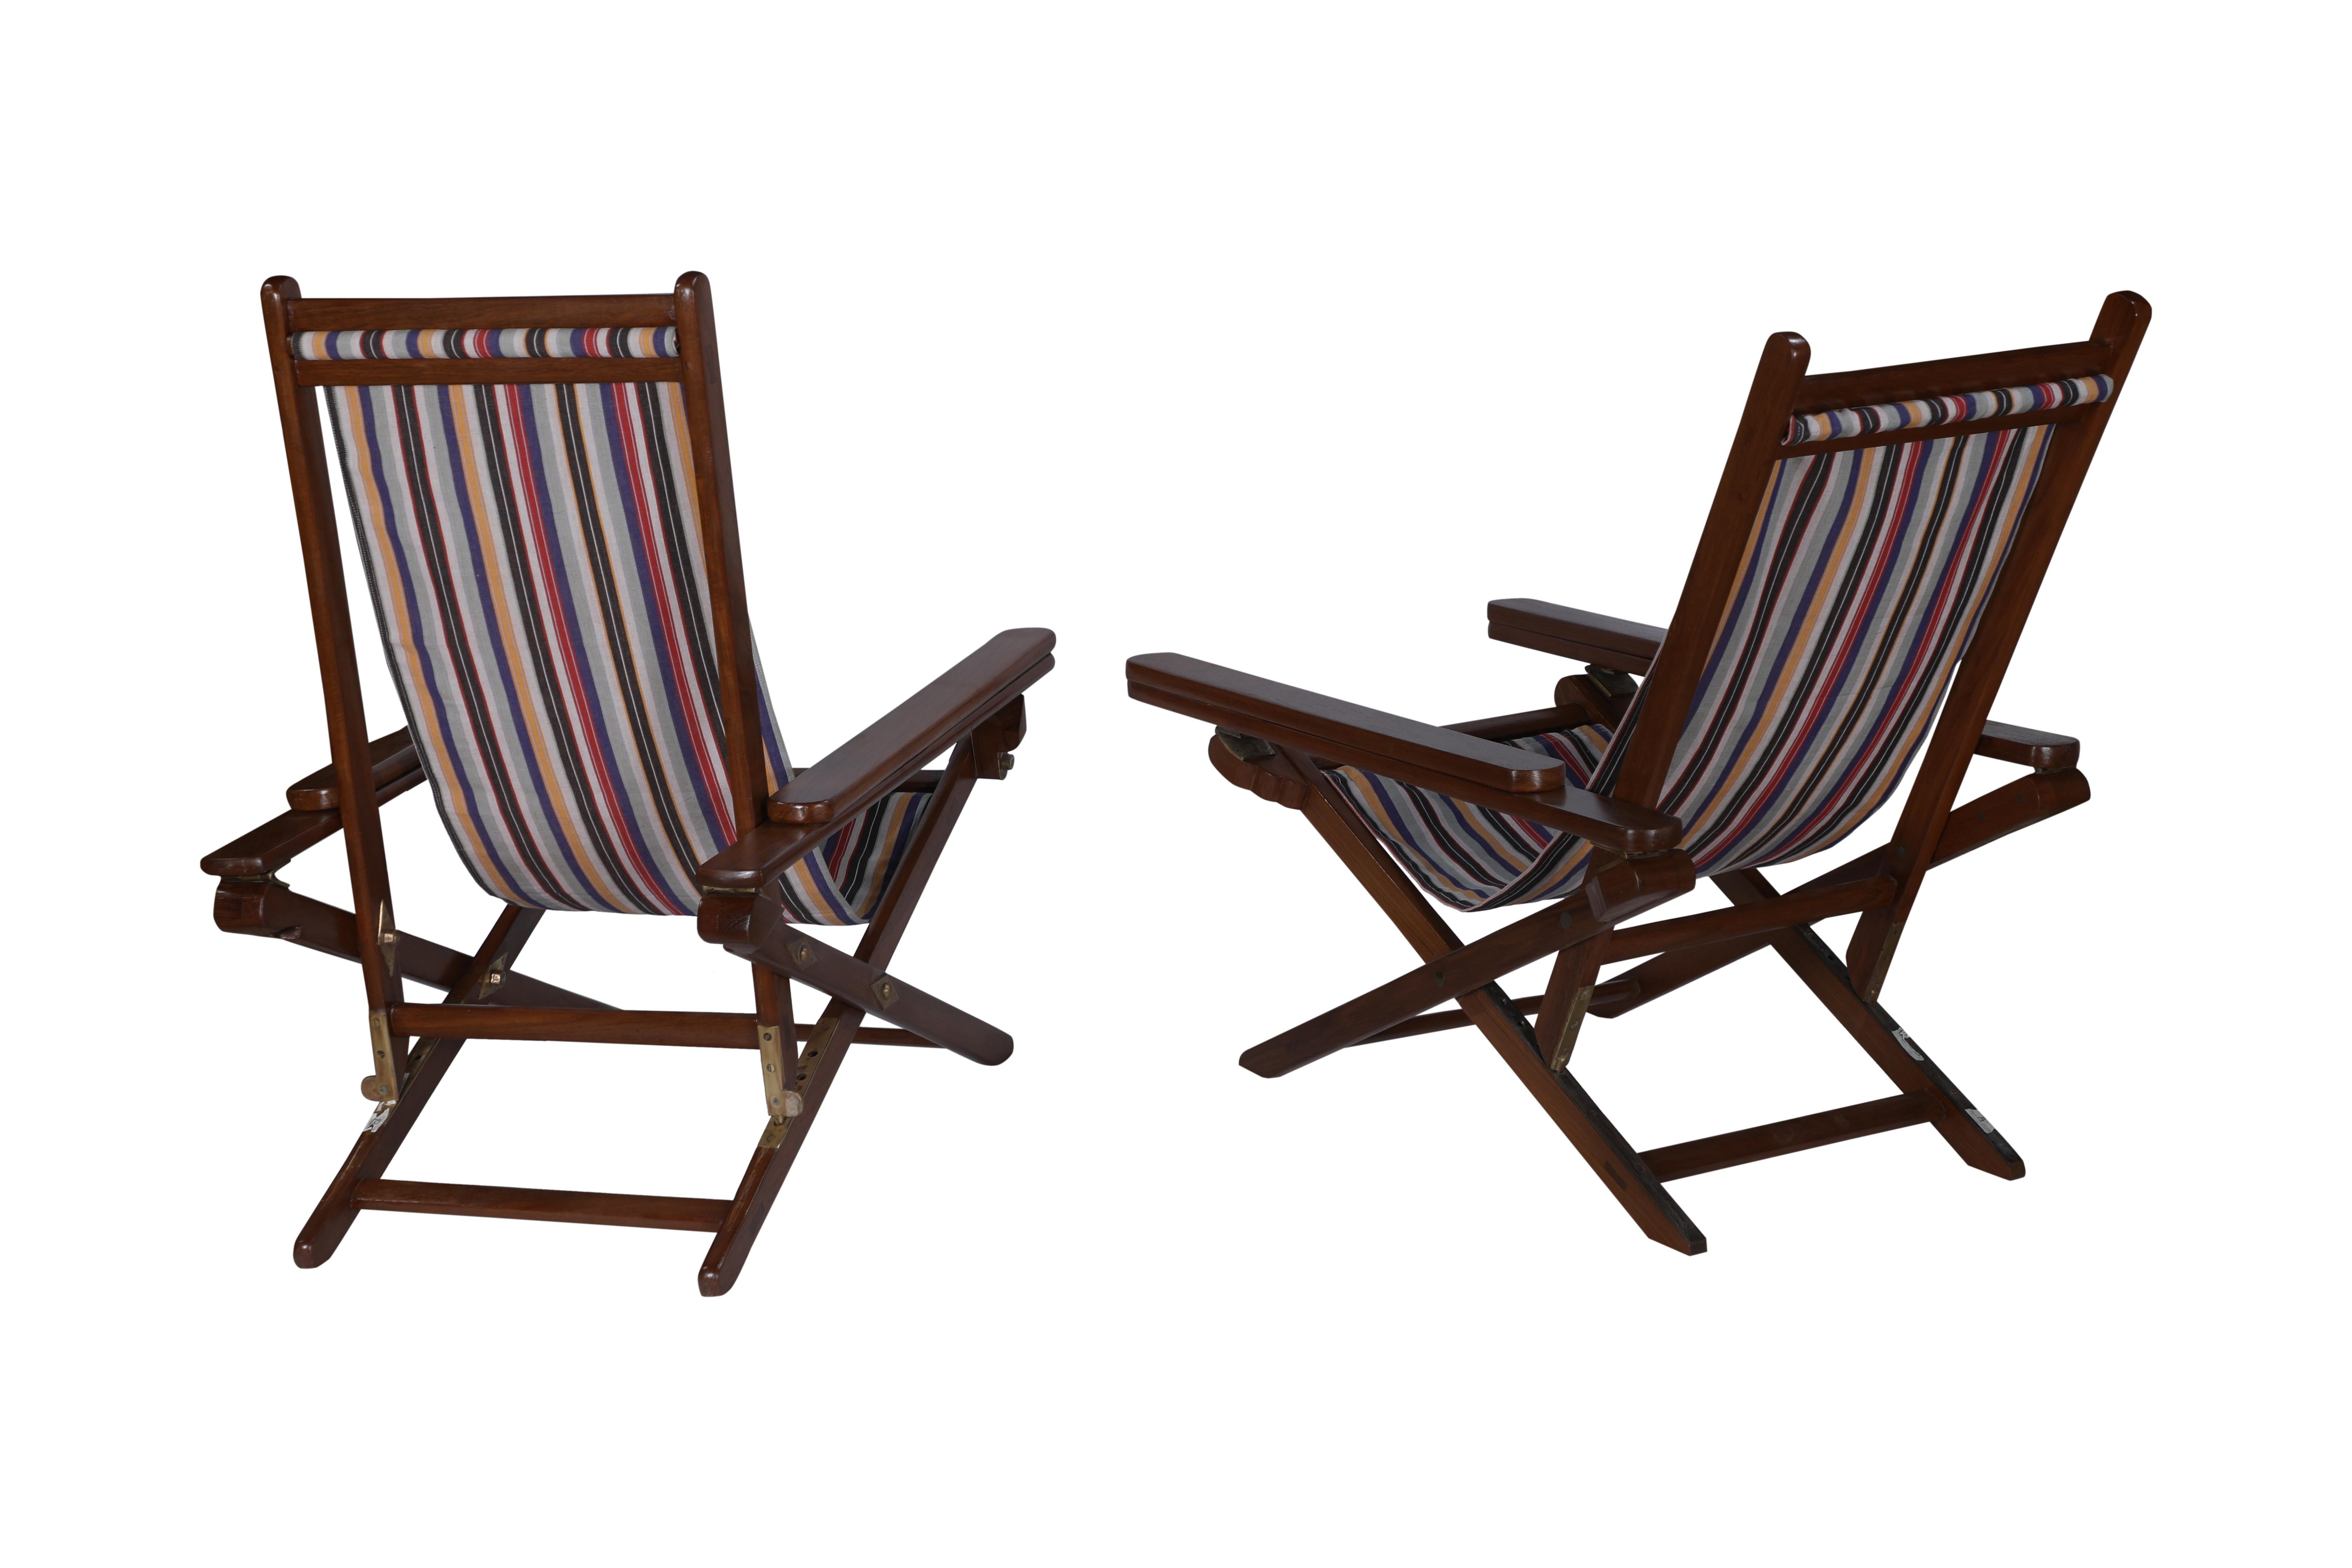 A pair of his and hers Campaign teak folding chairs with canvas sling seats.  The back also adjusts forward and back and the arm rests pull forward creating a leg rest.  There are two canvas options, the stripe and the solid green and both are